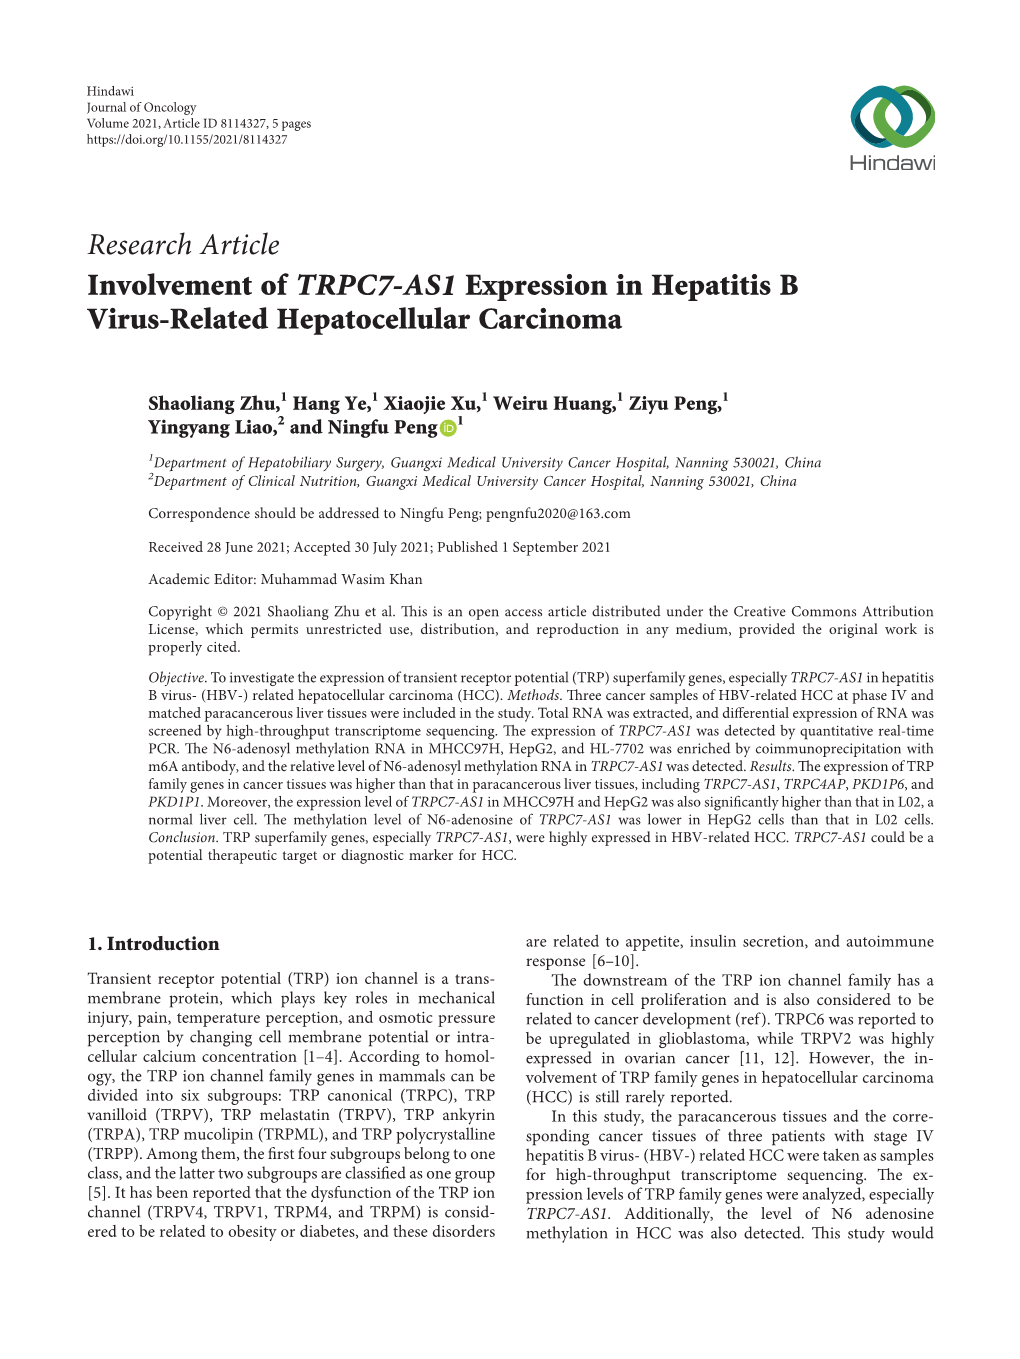 Research Article Involvement of TRPC7-AS1 Expression in Hepatitis B Virus-Related Hepatocellular Carcinoma